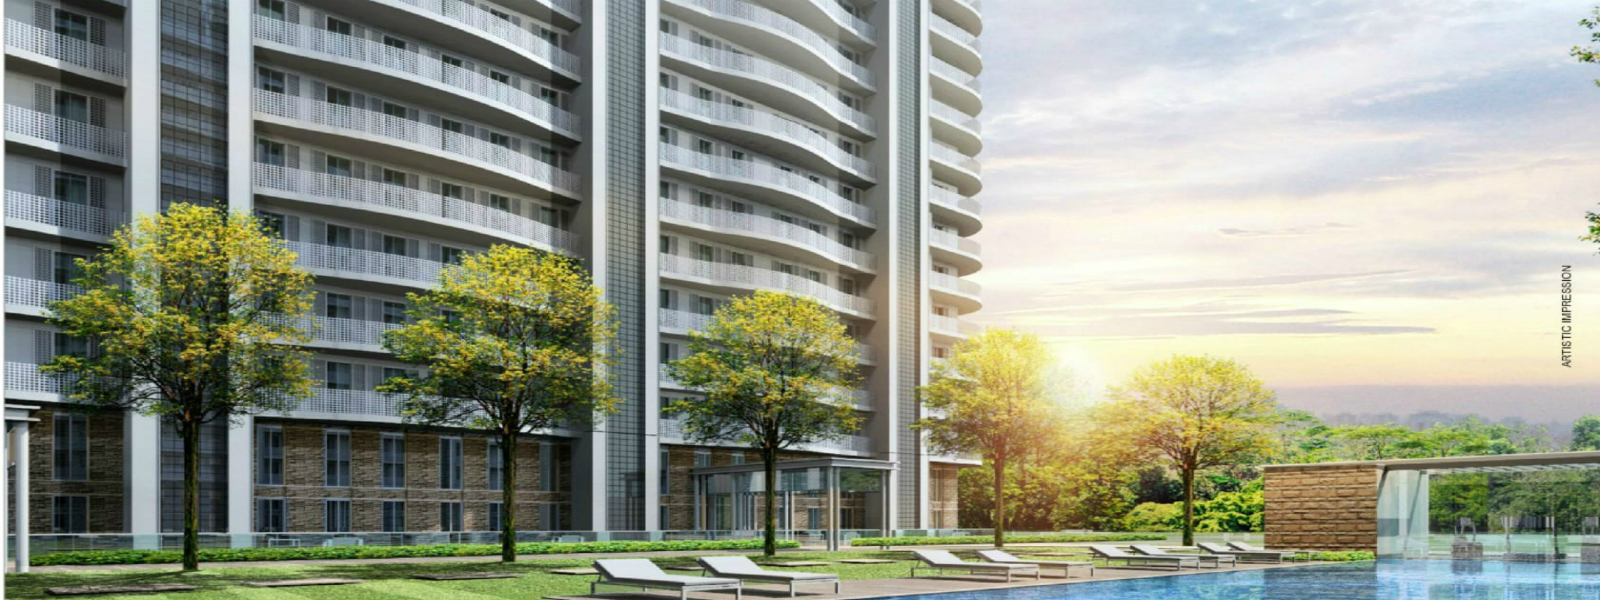 3 and 4 bhk Apartments in Gurgaon